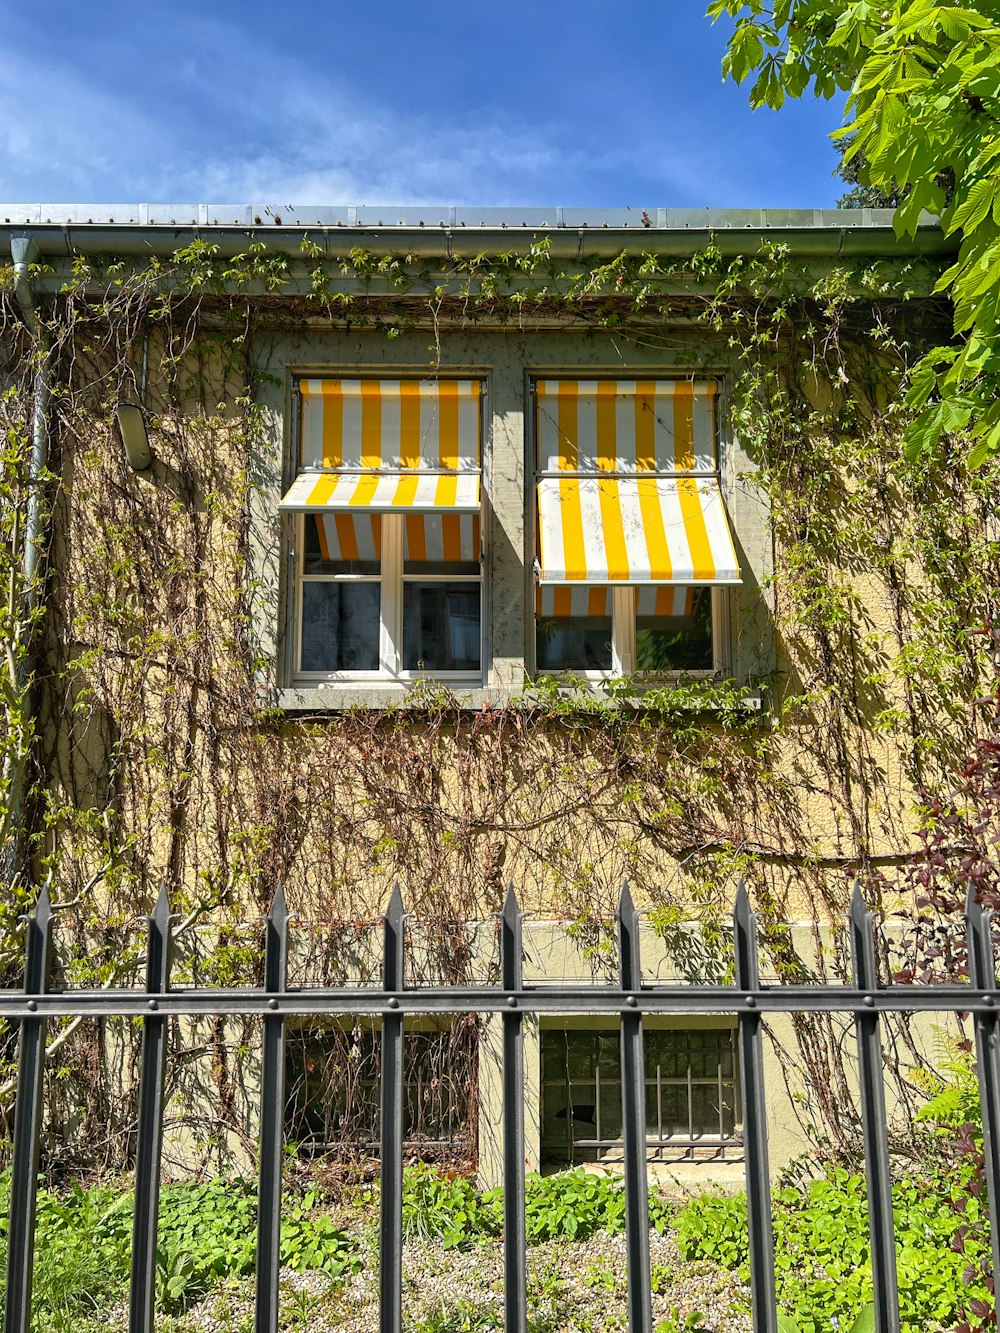 a building with a fence and a window with yellow and white striped awnings